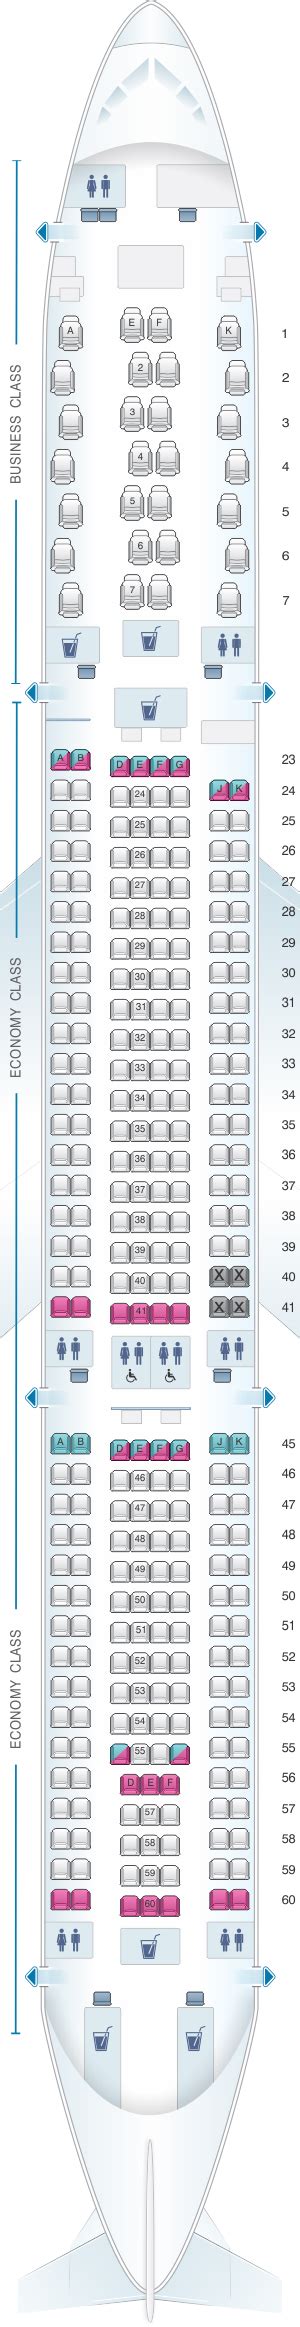 Airbus A330 Seating